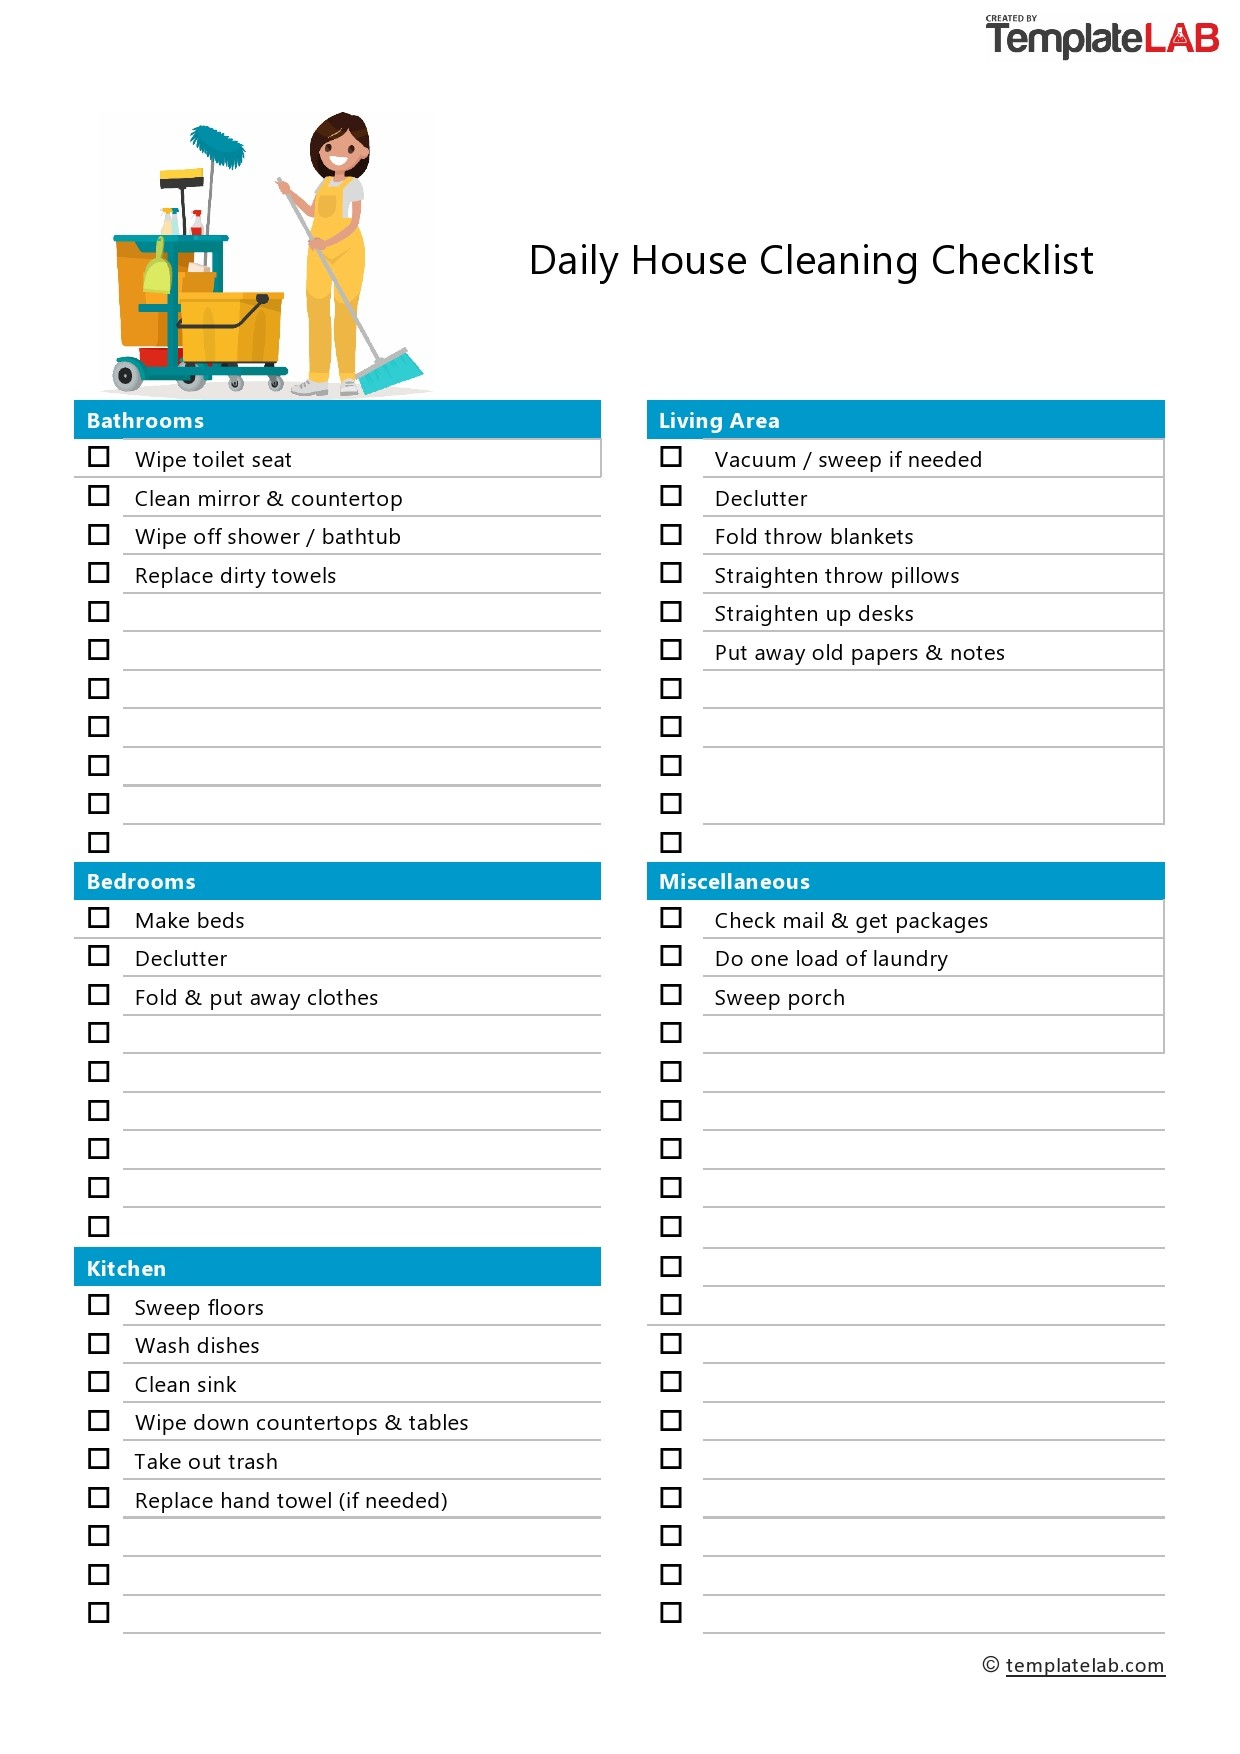 11 Printable House Cleaning Checklist Templates ᐅ TemplateLab Regarding Residential Cleaning Checklist Template Intended For Residential Cleaning Checklist Template